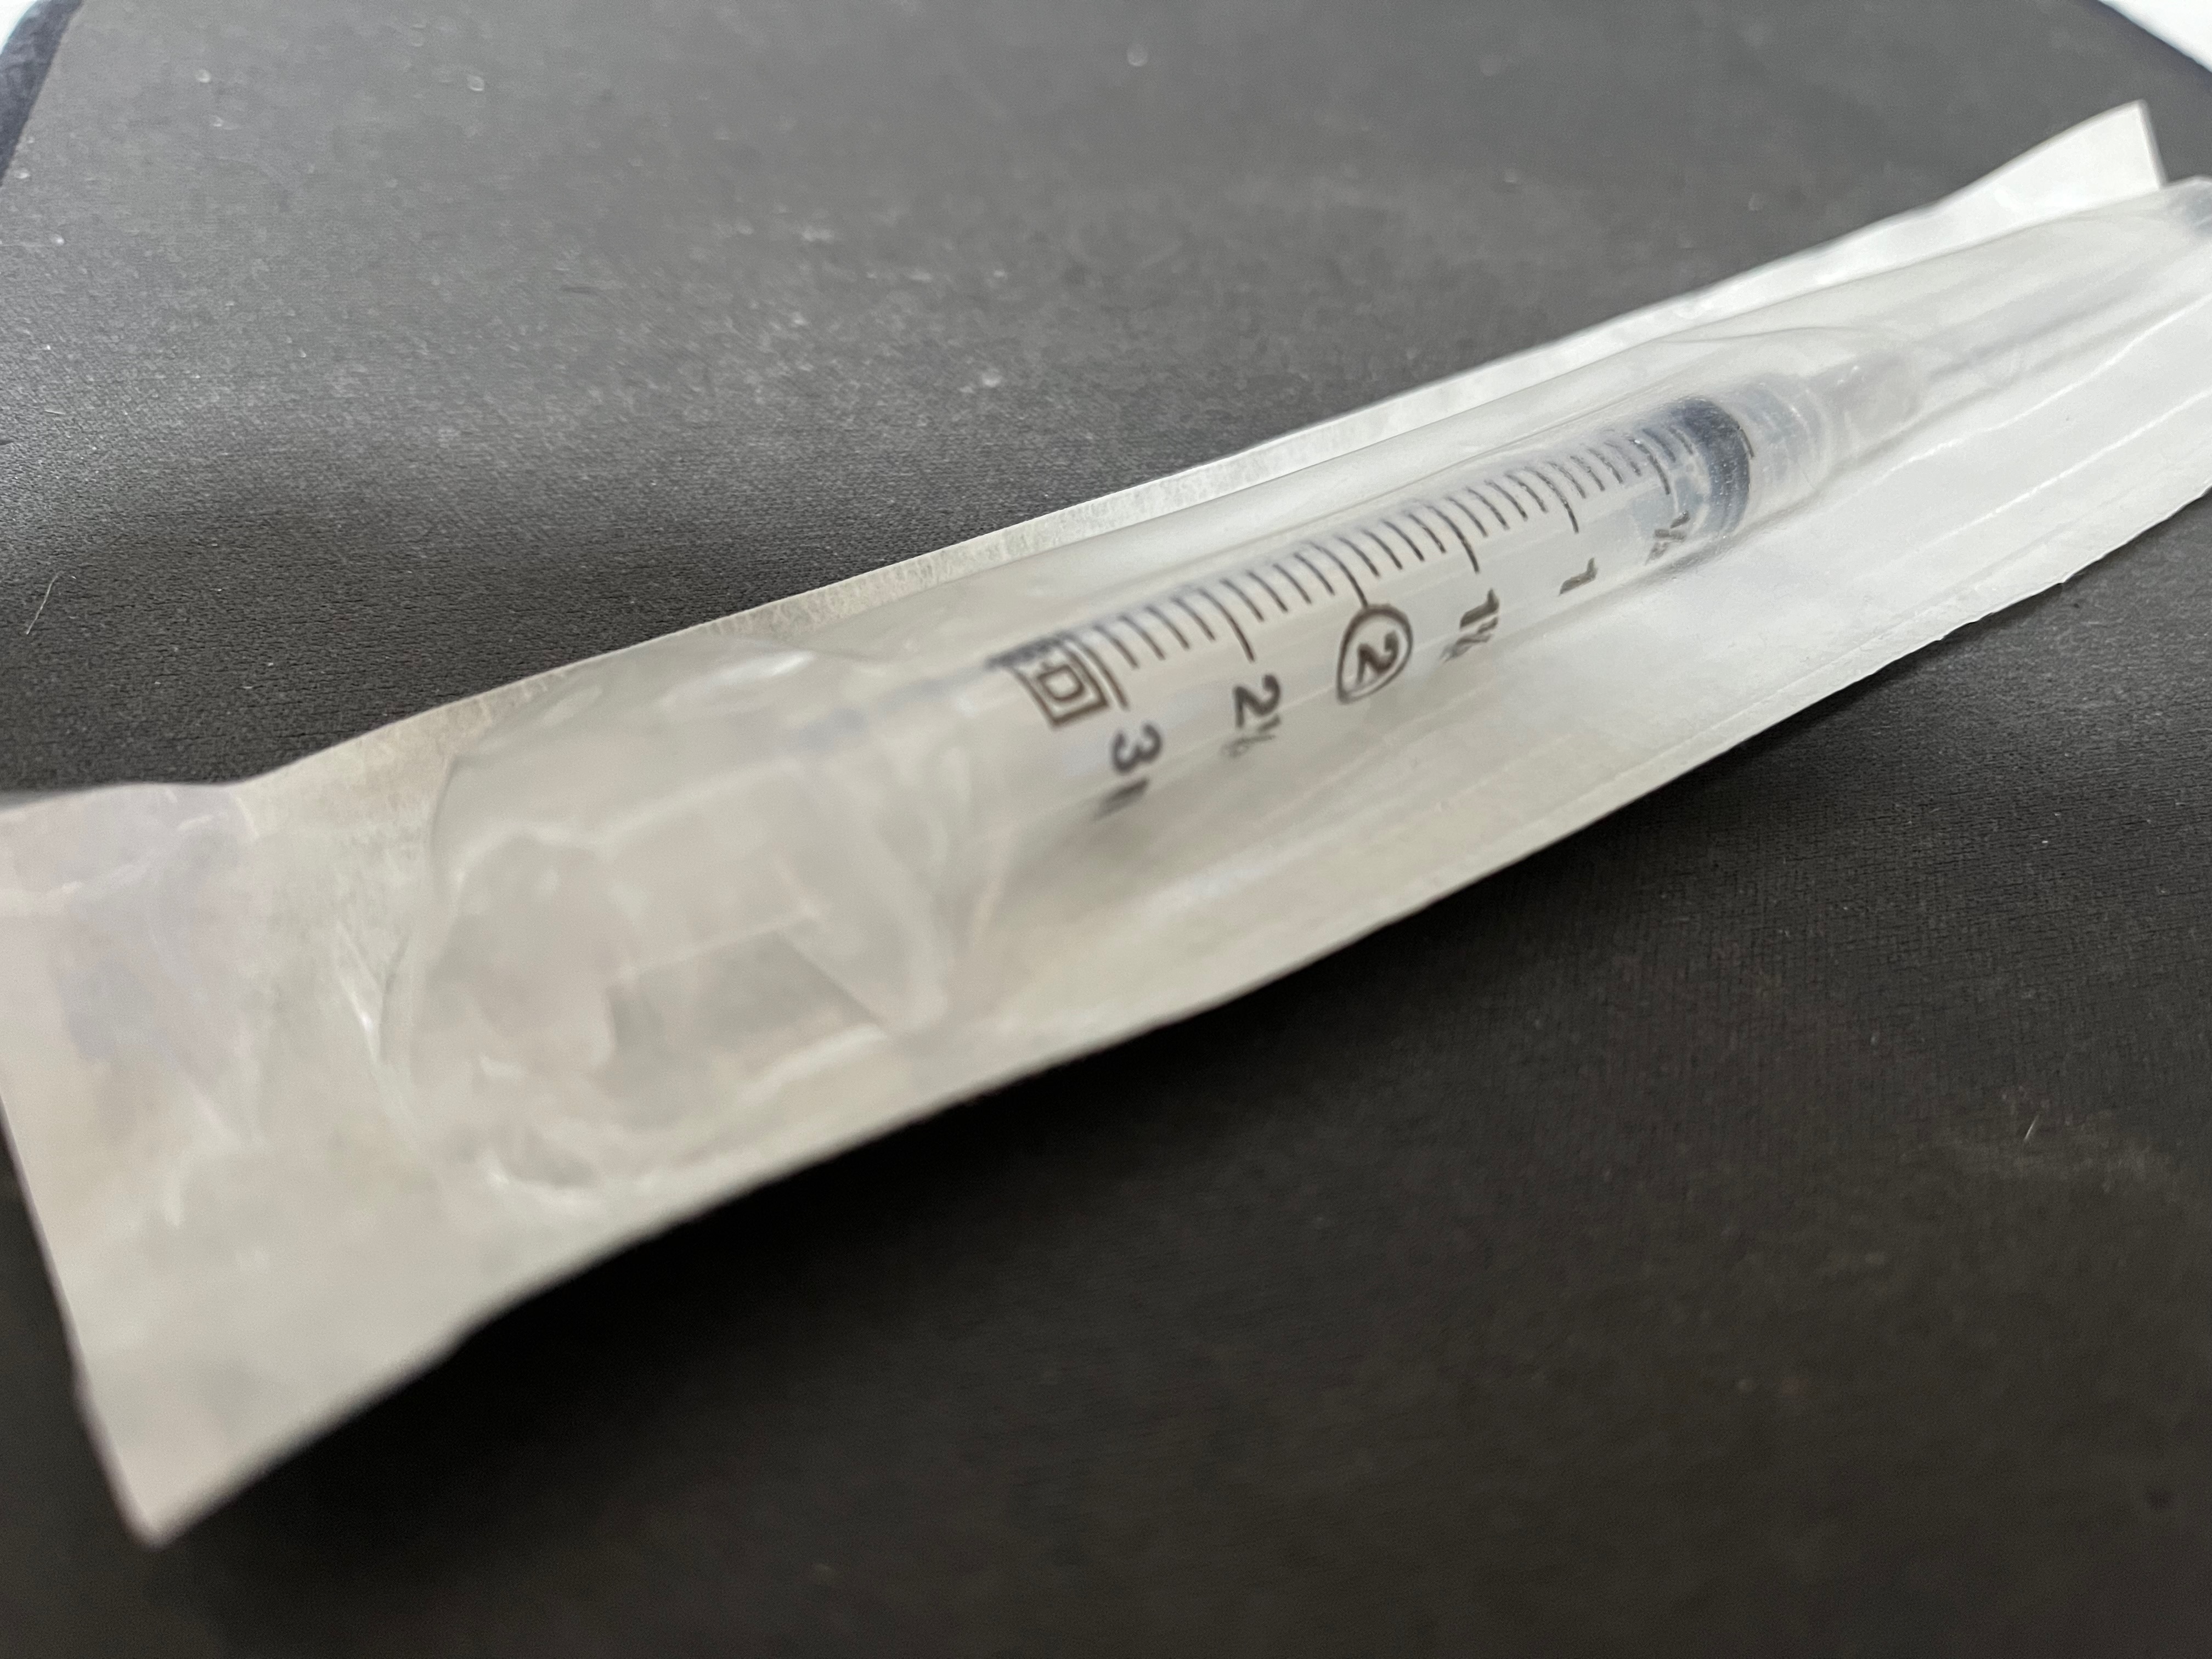 A photograph of a syringe for instramuscular injection with needle still in its wrapper.